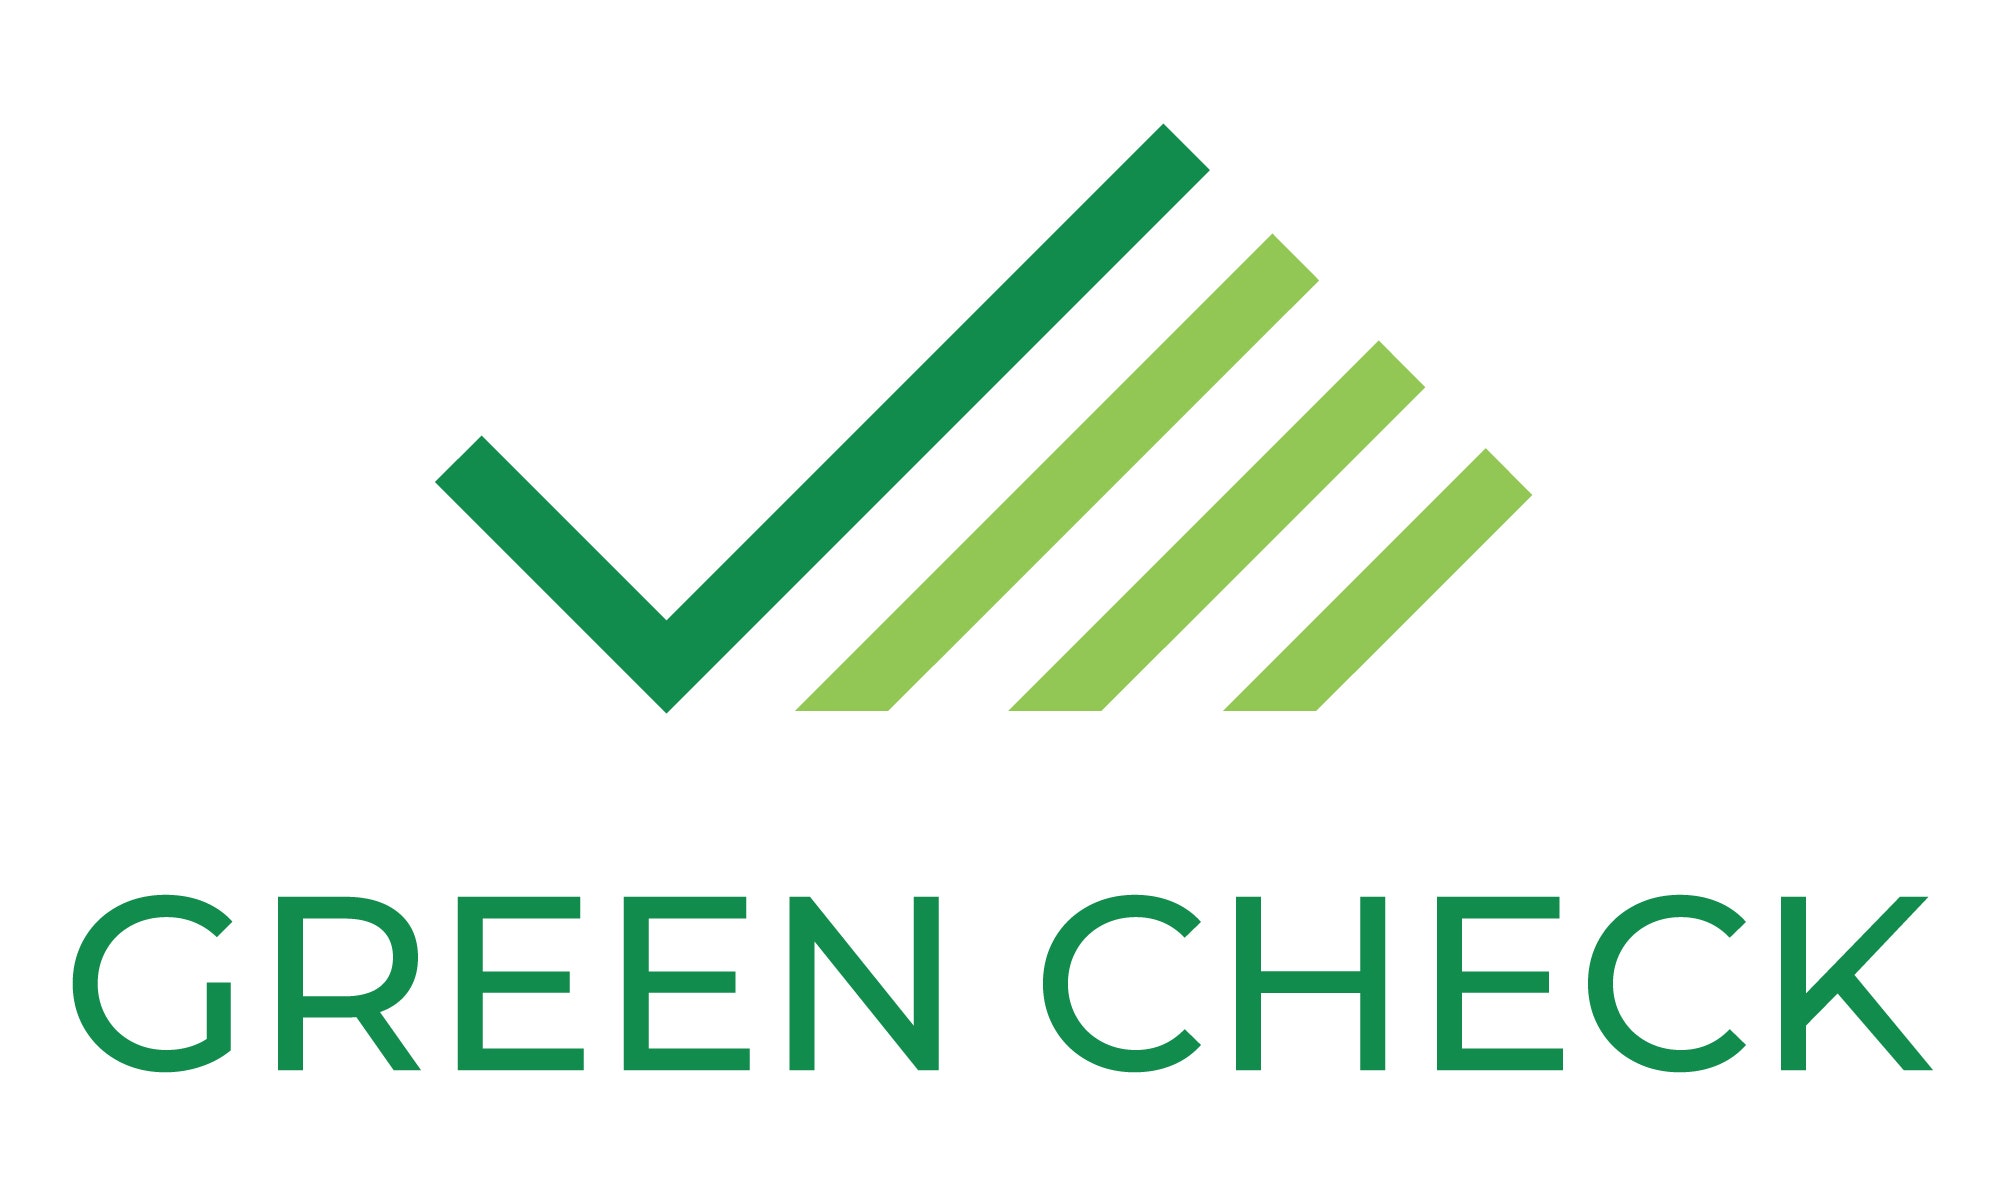 Cannabis Banking Solutions Provider Green Check Verified Raises $3M With Investors Flatiron Venture Partners, Robert Wolf And Others